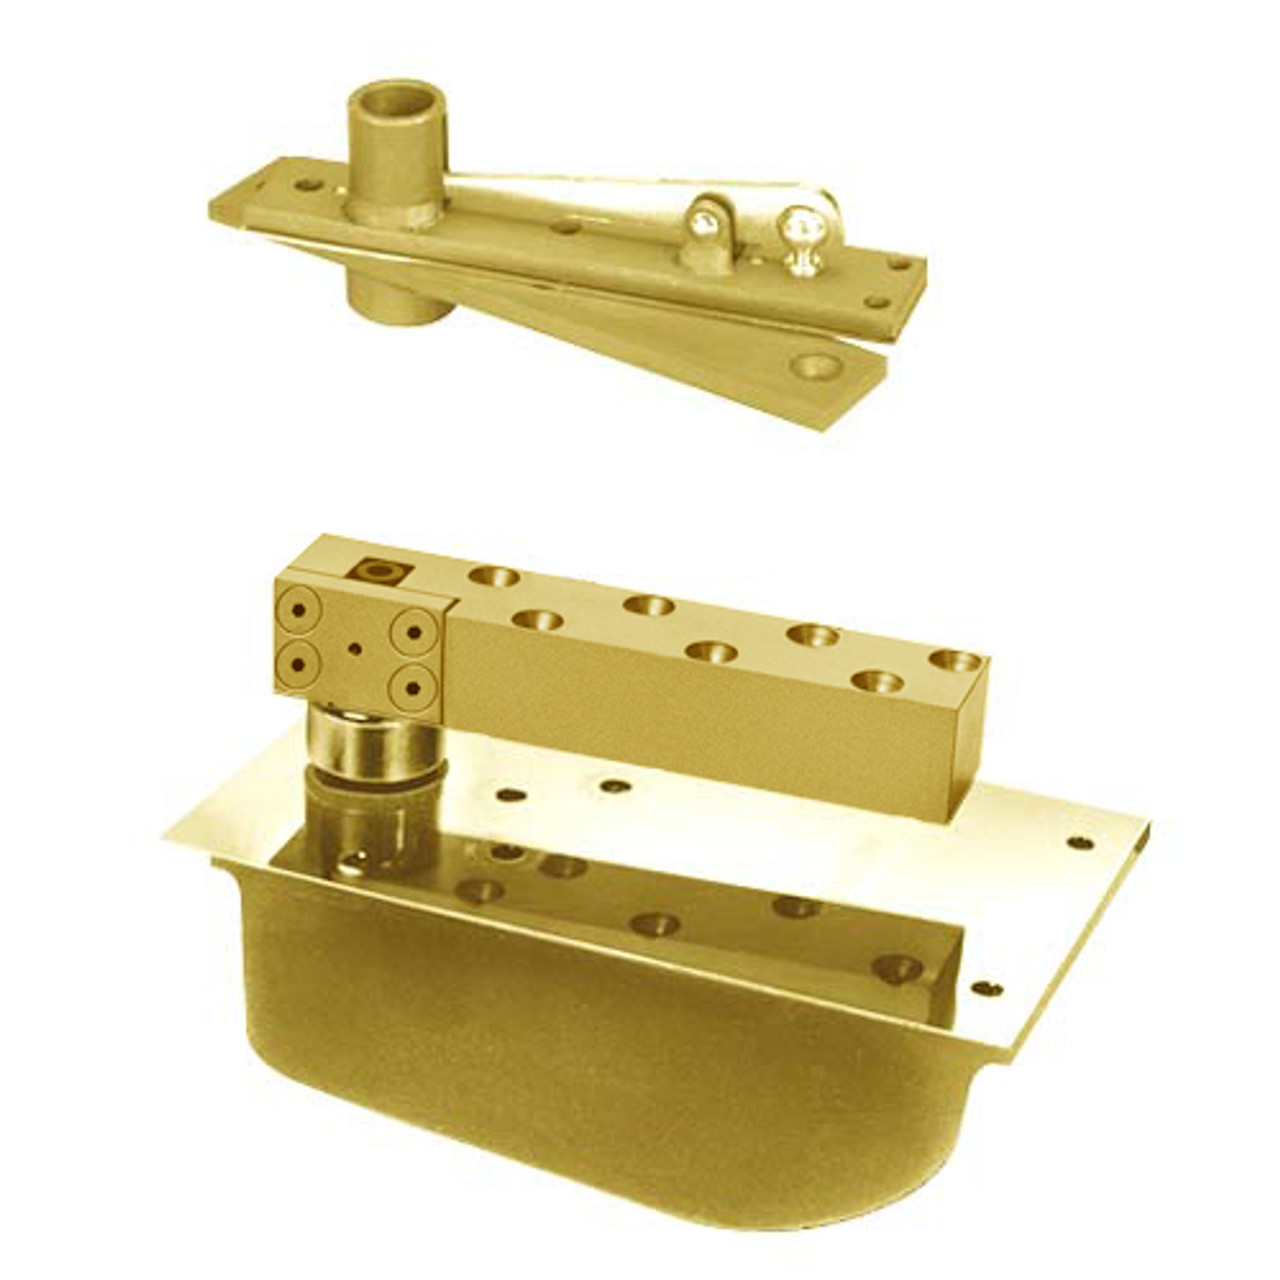 H28-85N-587-RH-606 Rixson 28 Series Extra Heavy Duty Single Acting Center Hung Concealed Floor Closer in Satin Brass Finish